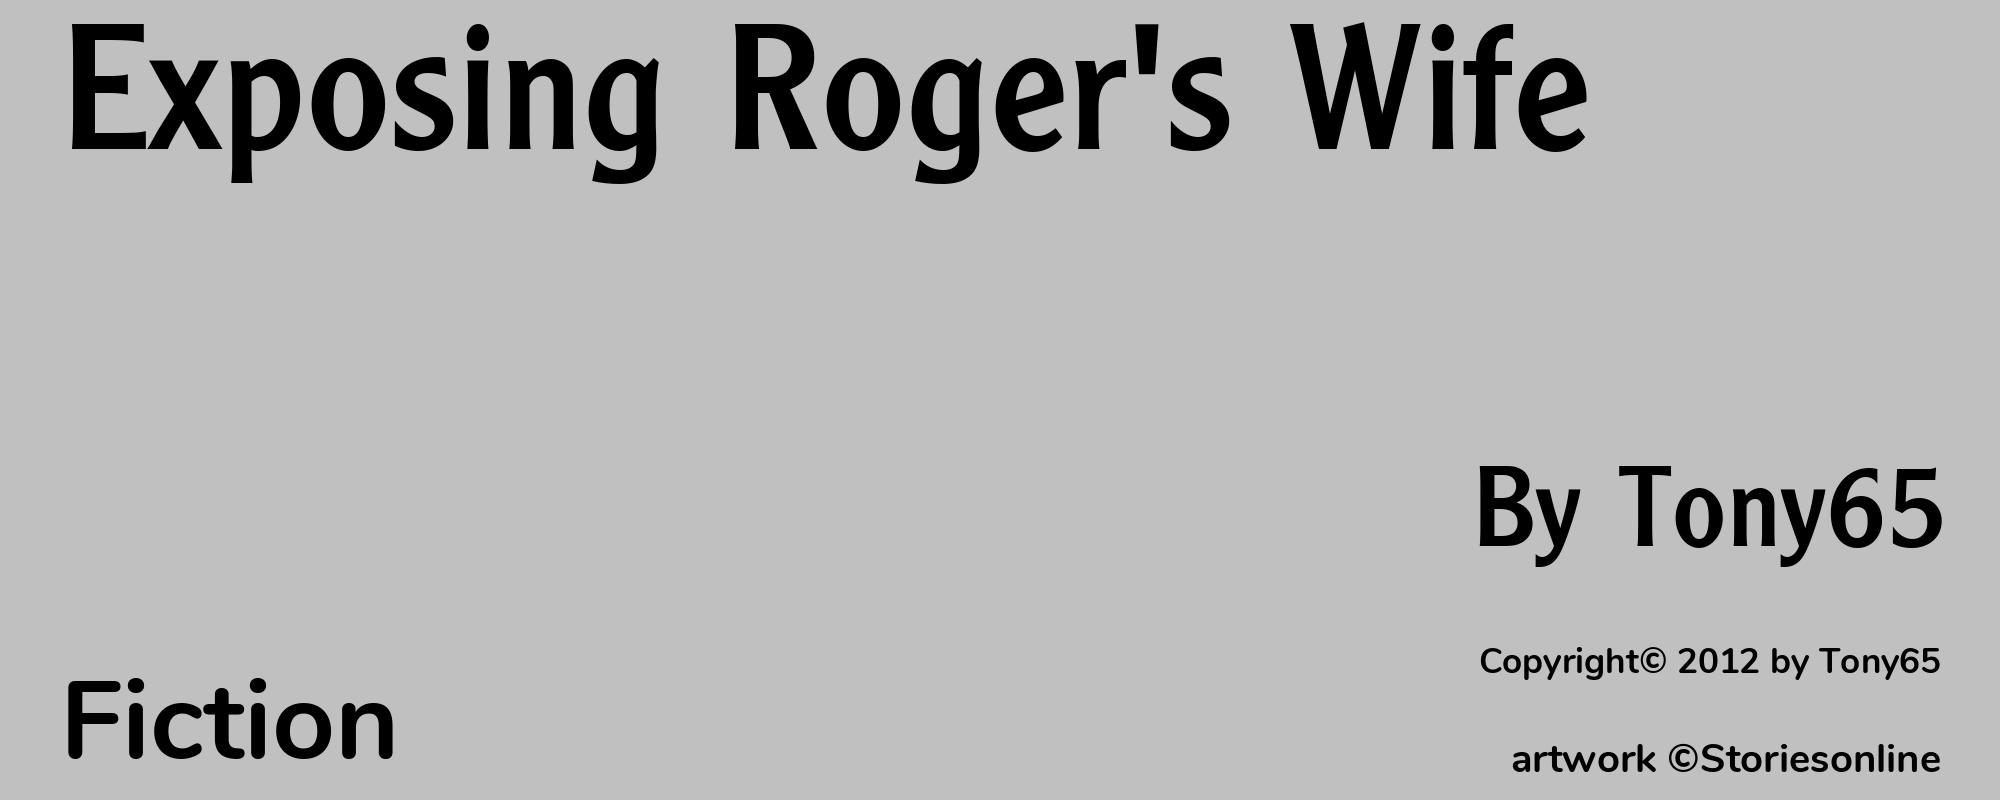 Exposing Roger's Wife - Cover